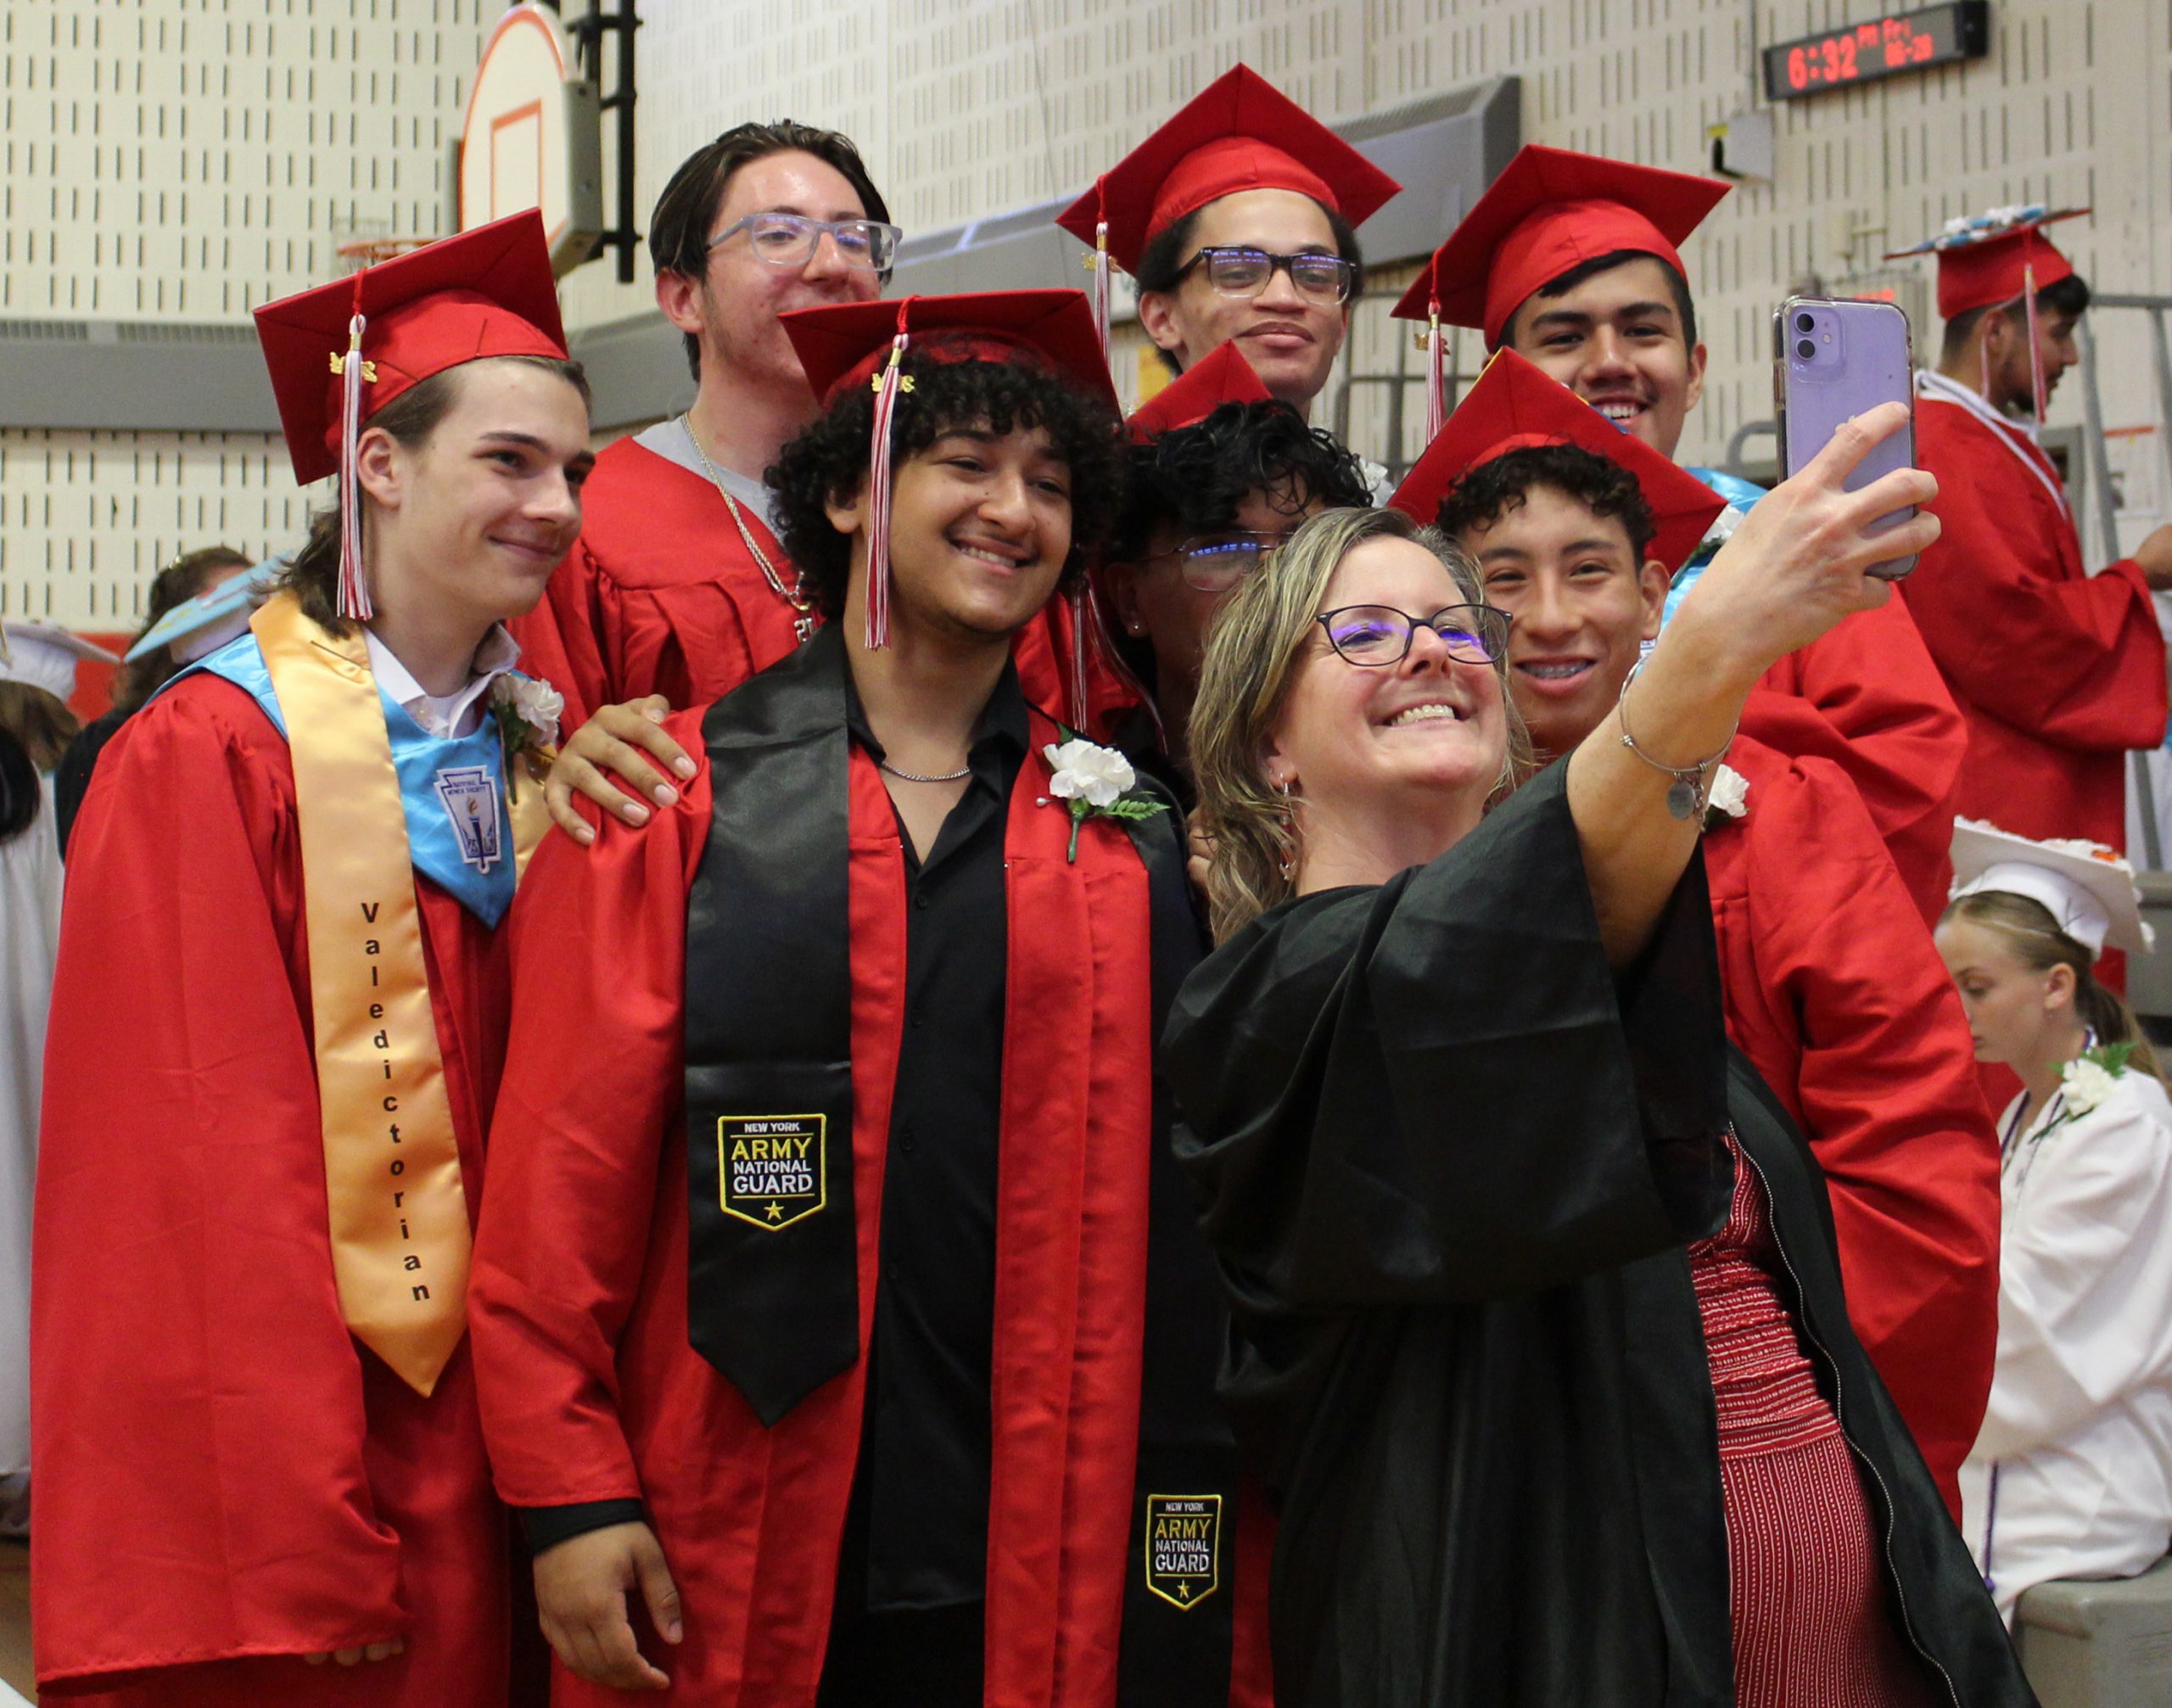 An adult takes a selfie with a group of students.